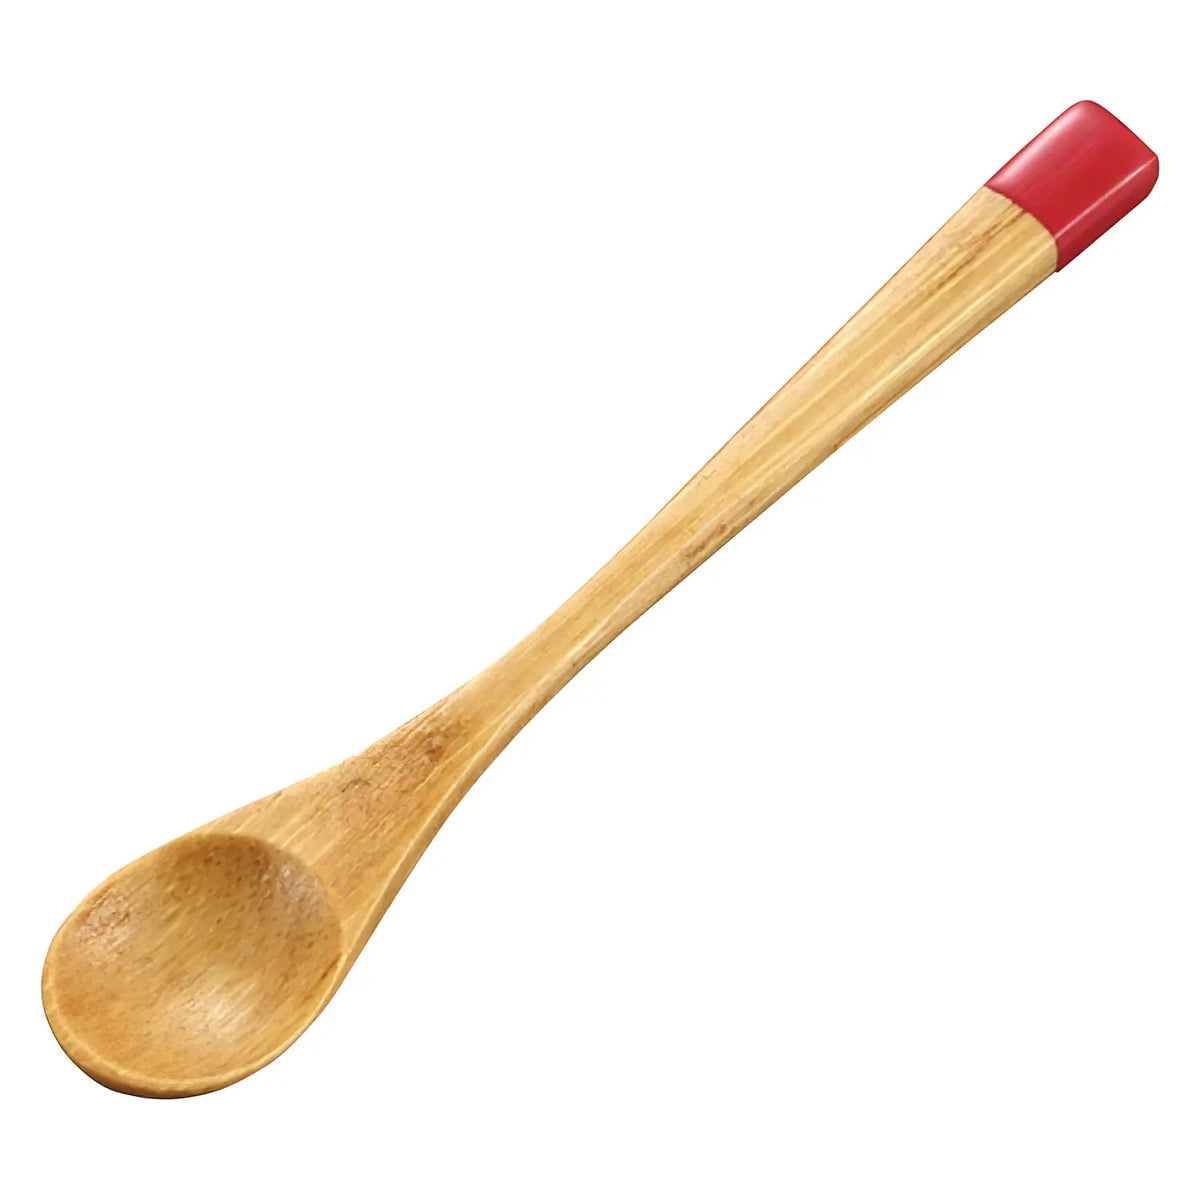 EBM Bamboo Lacquered Condiments Spoon